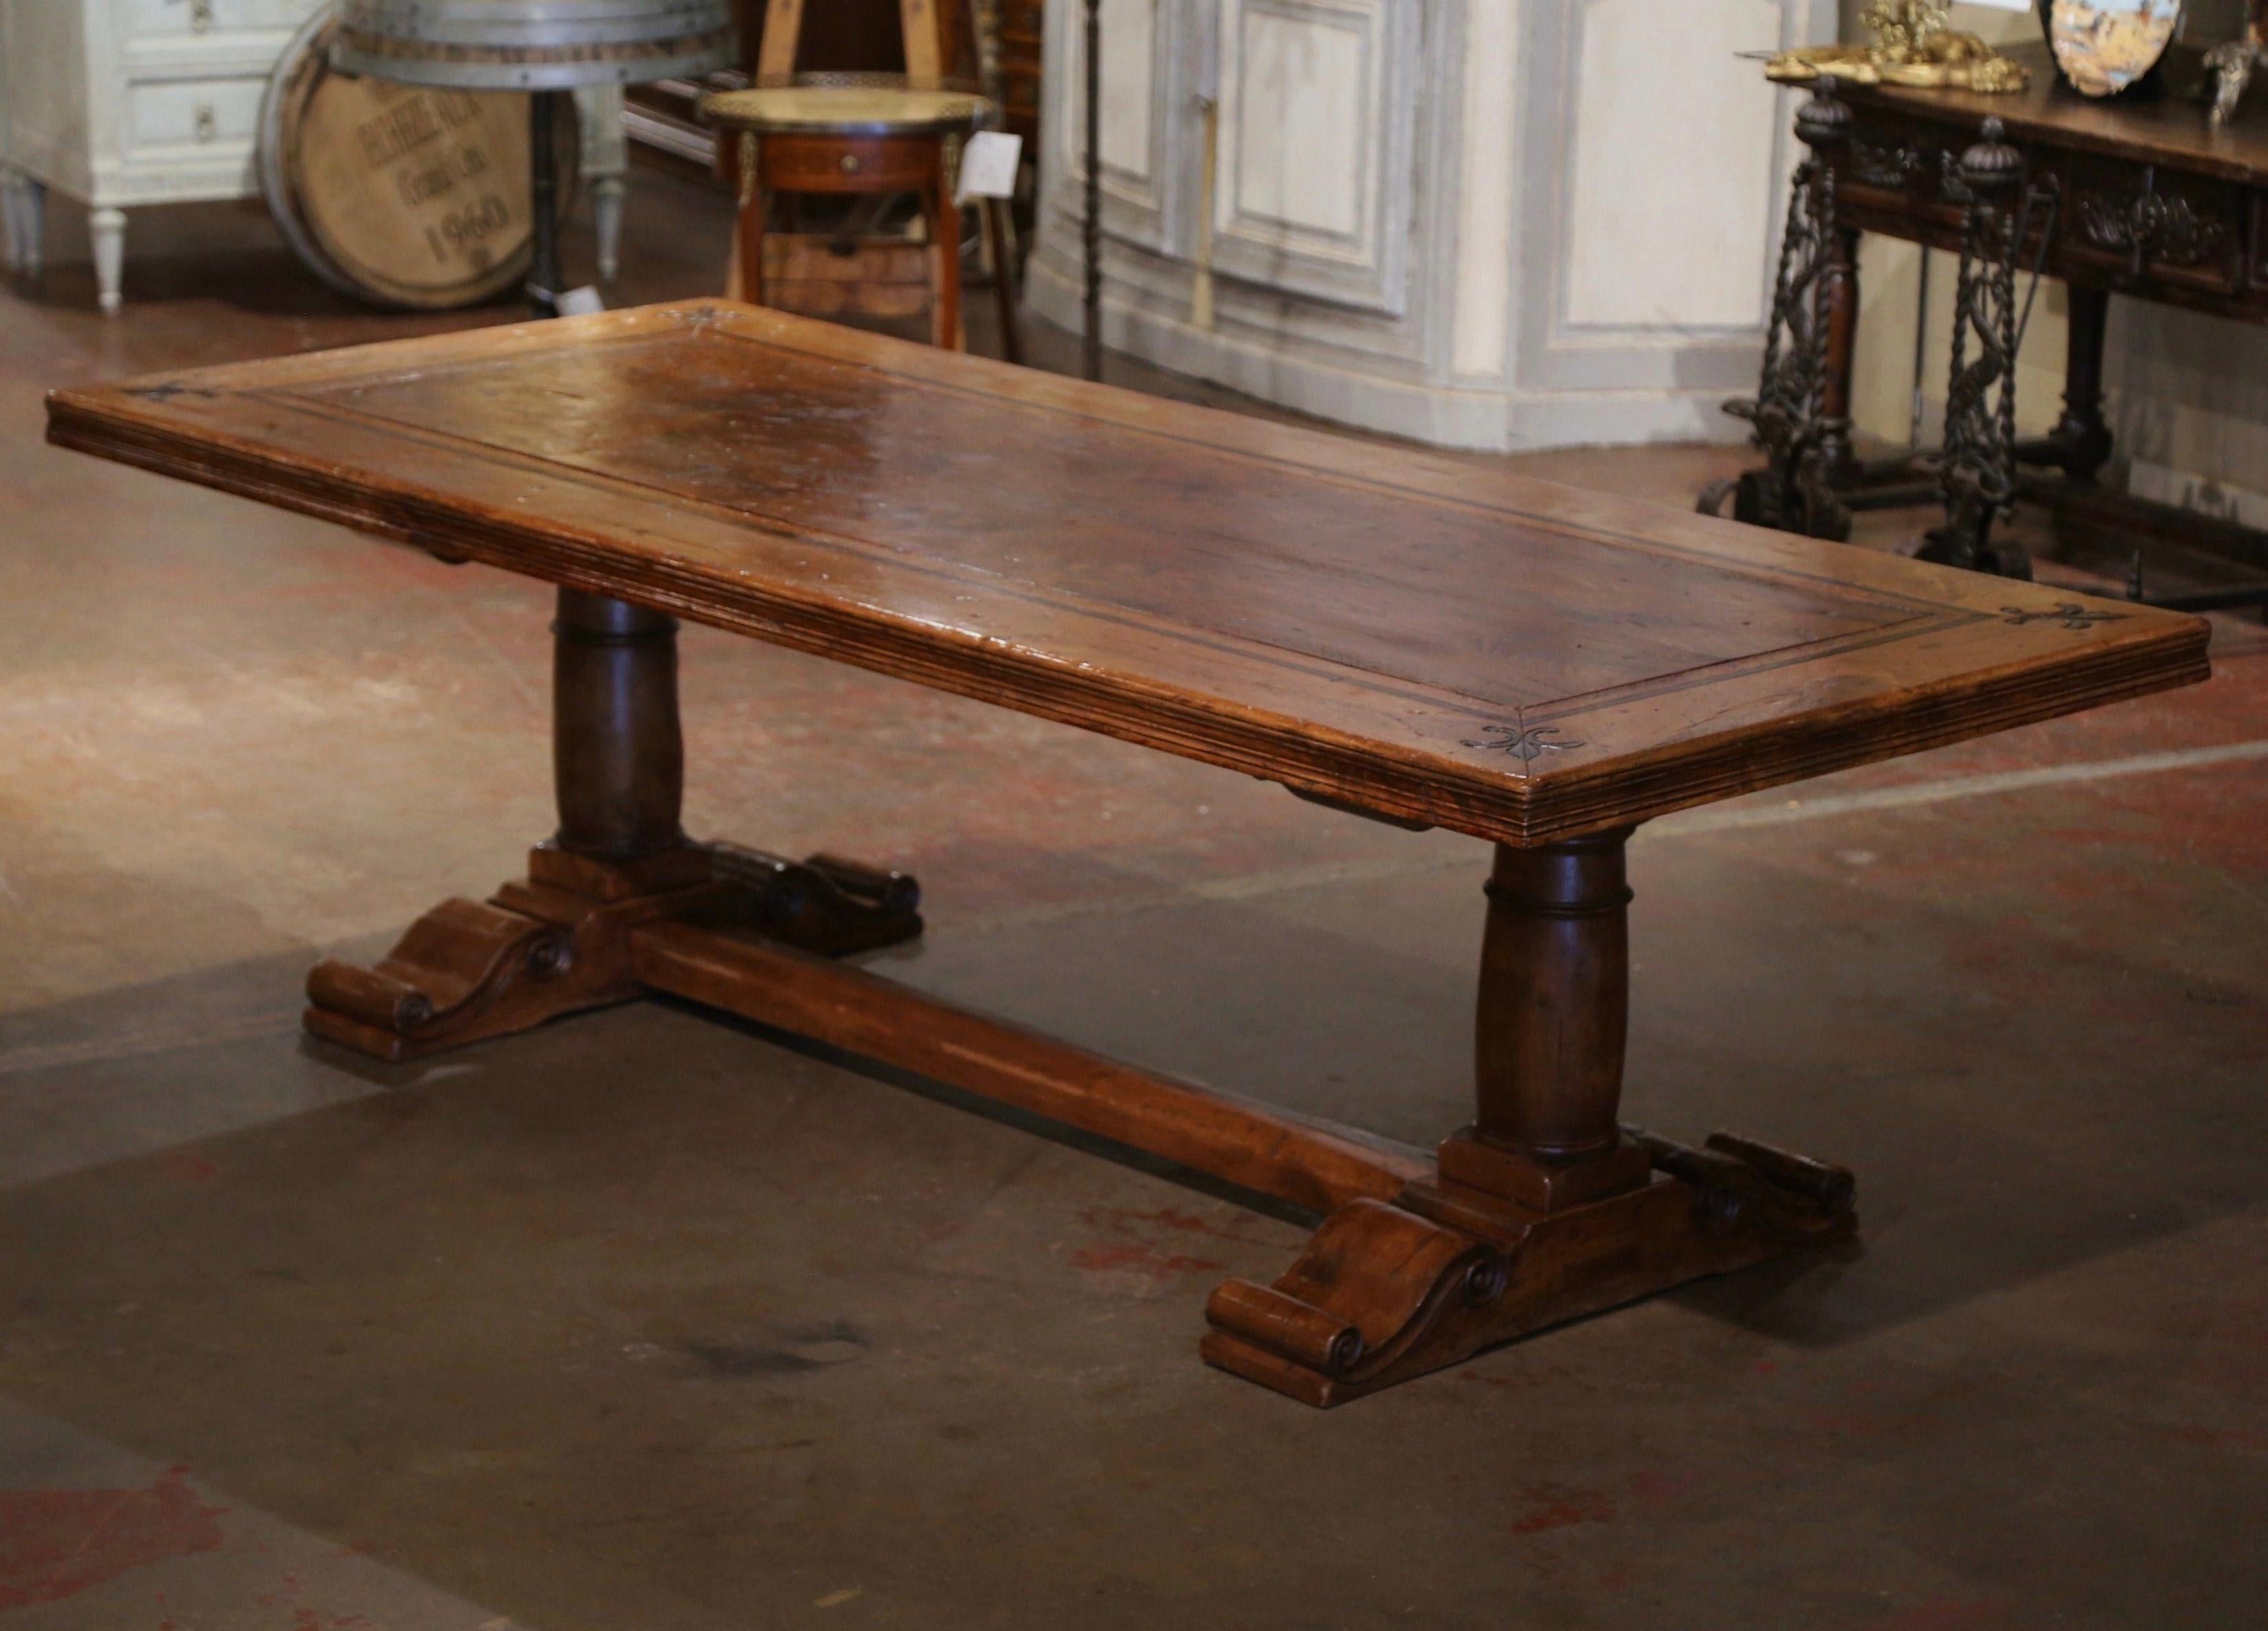  French Carved Antique Walnut & Elm Trestle Dining Table with Fleur de Lys Decor In Excellent Condition For Sale In Dallas, TX